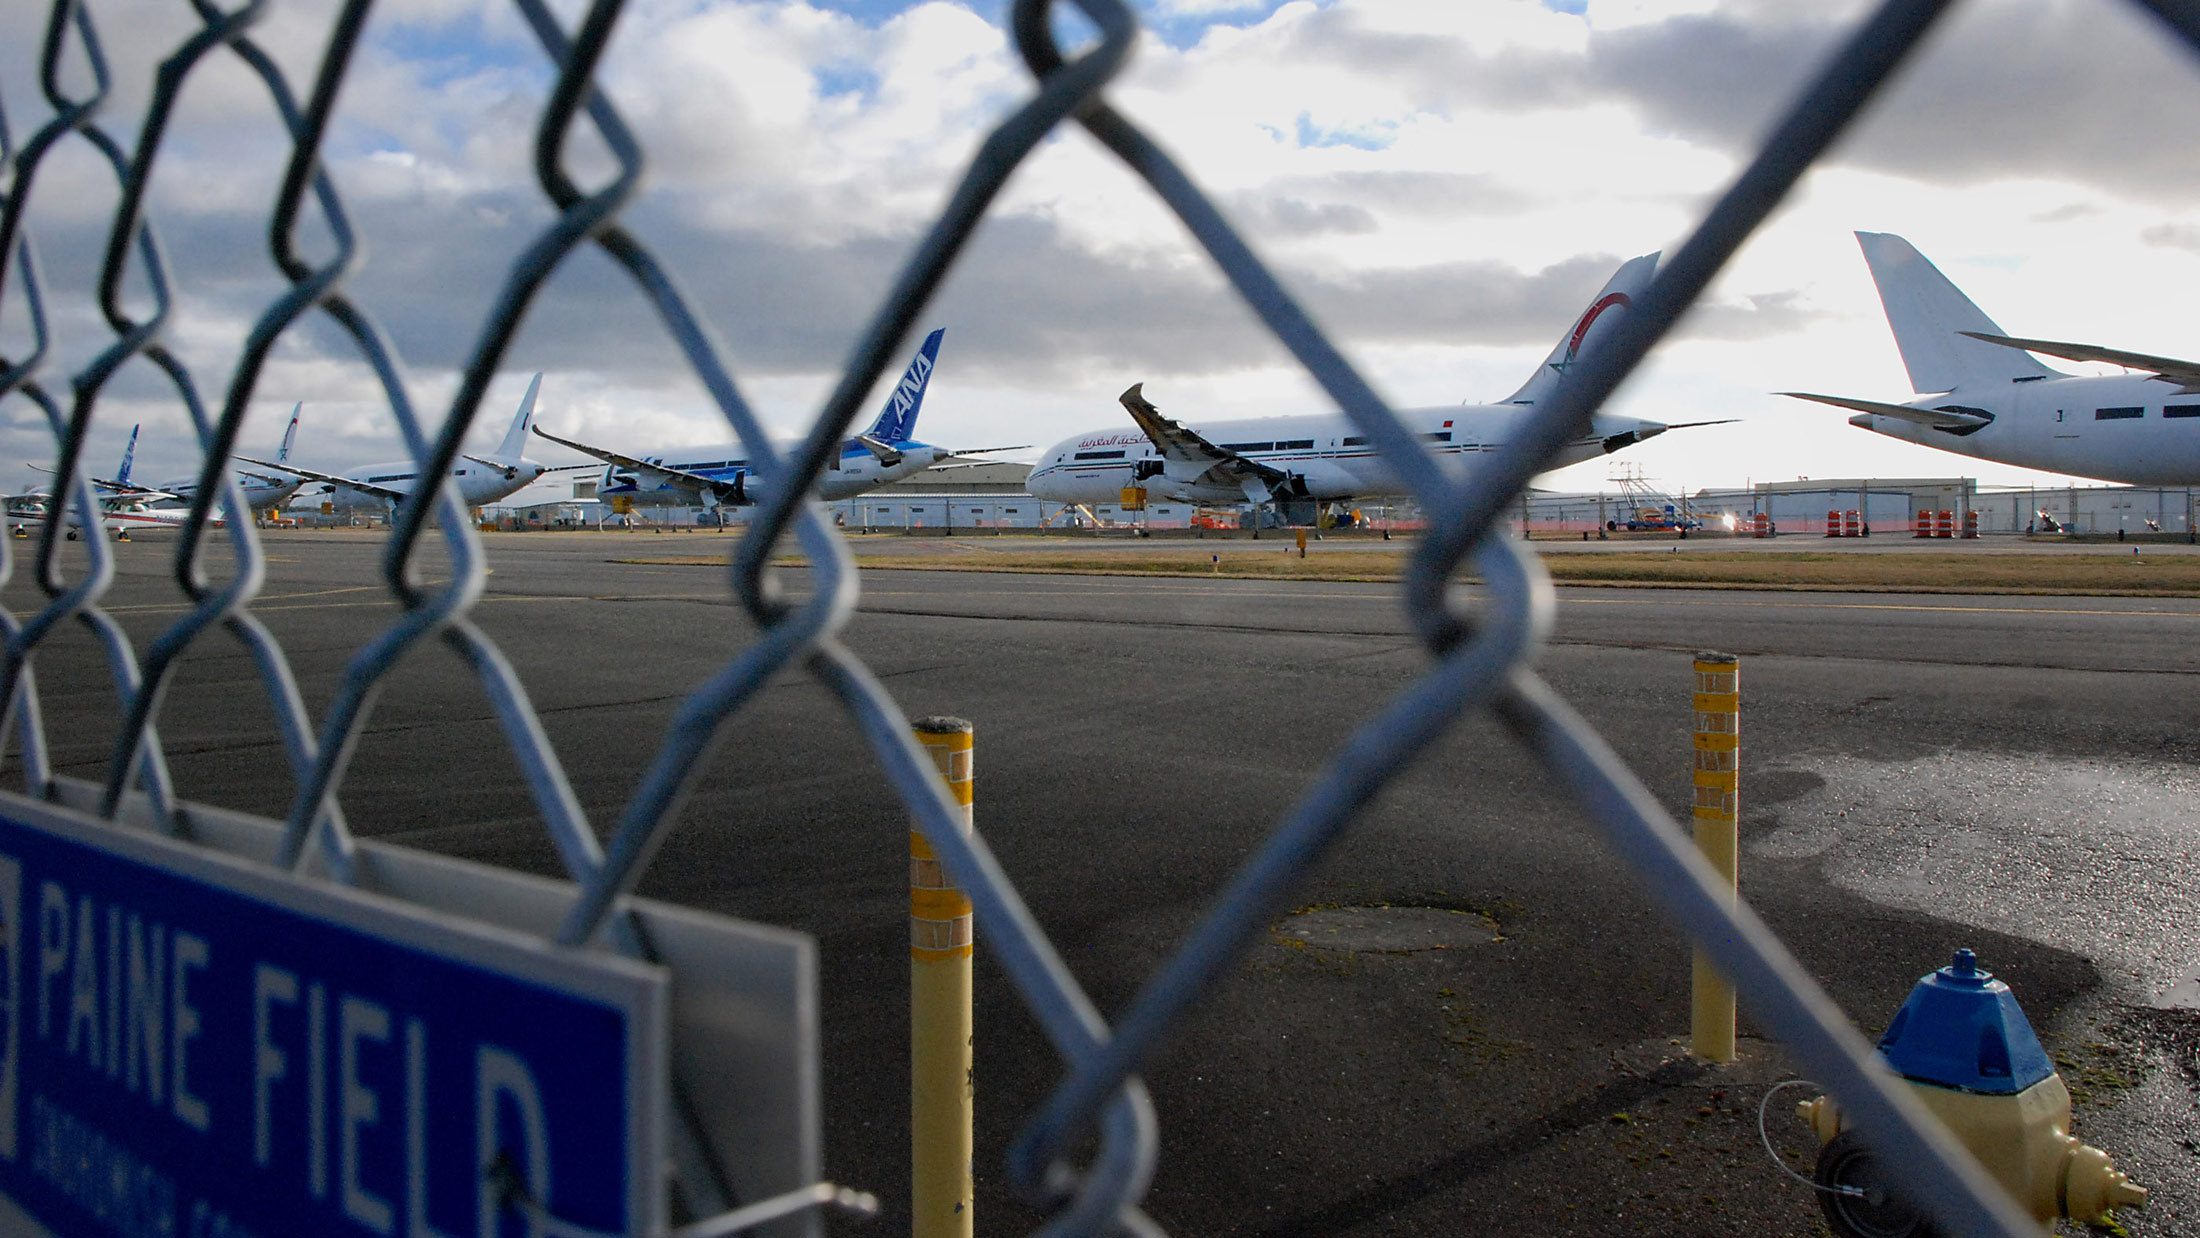 Boeing Co. 787 Dreamliners sit on the tarmac at Paine Field in Everett, Washington, on Feb. 14, 2014. Unloading the 787s would be a boost for Boeing after the aircraft sat outside the company’s largest Seattle-area factory for about five years.
